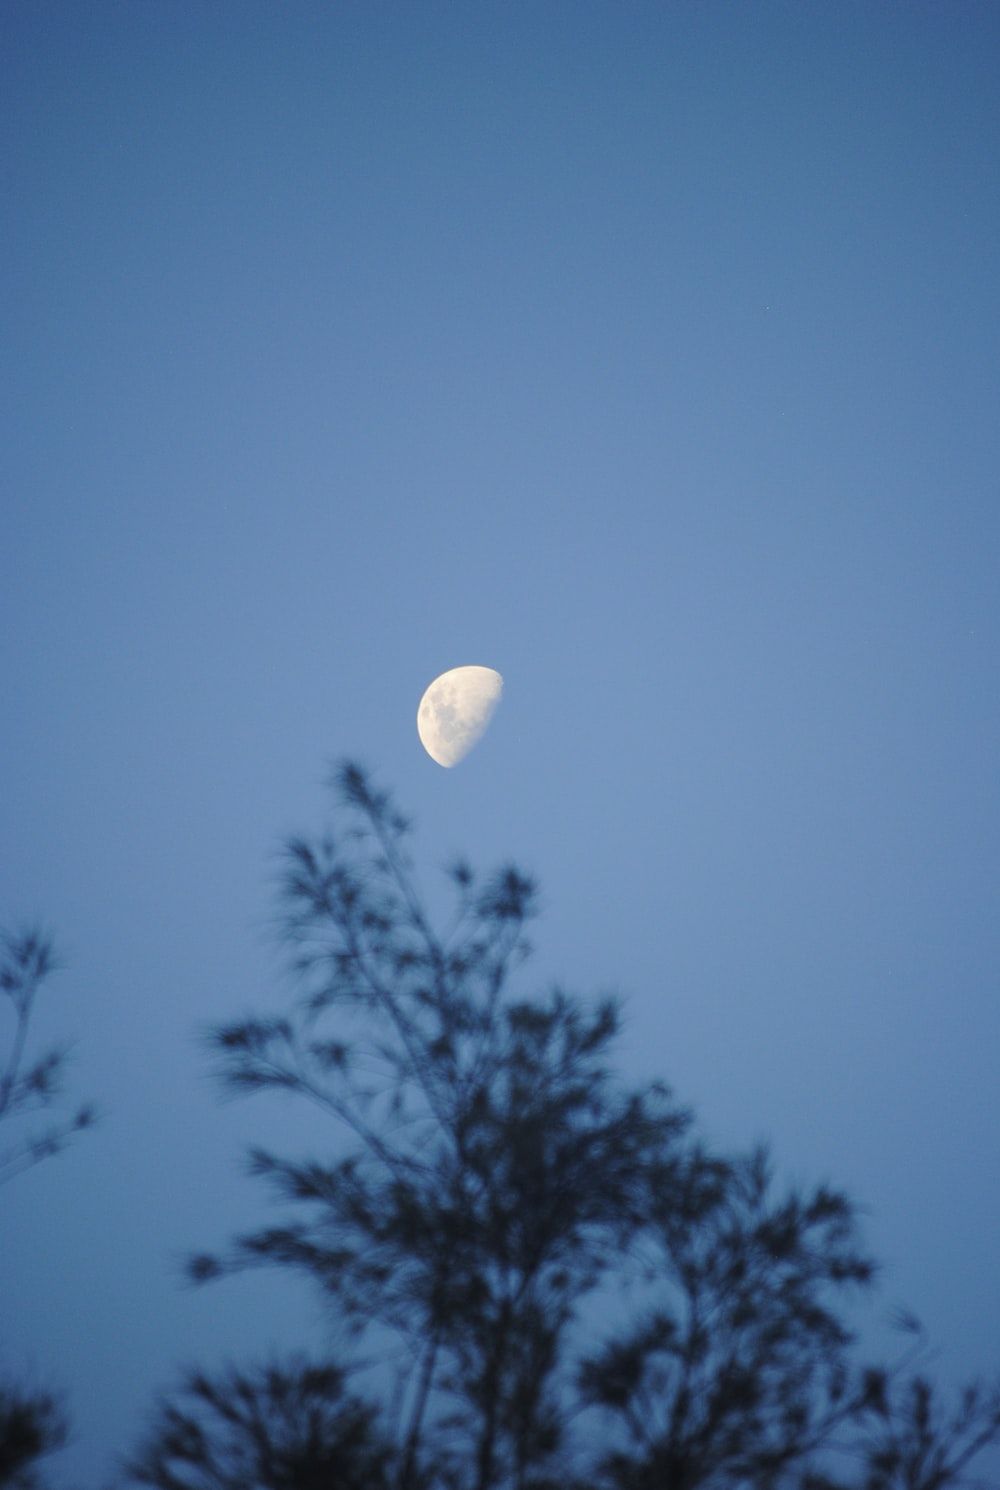 A moon is in the sky with trees - Light blue